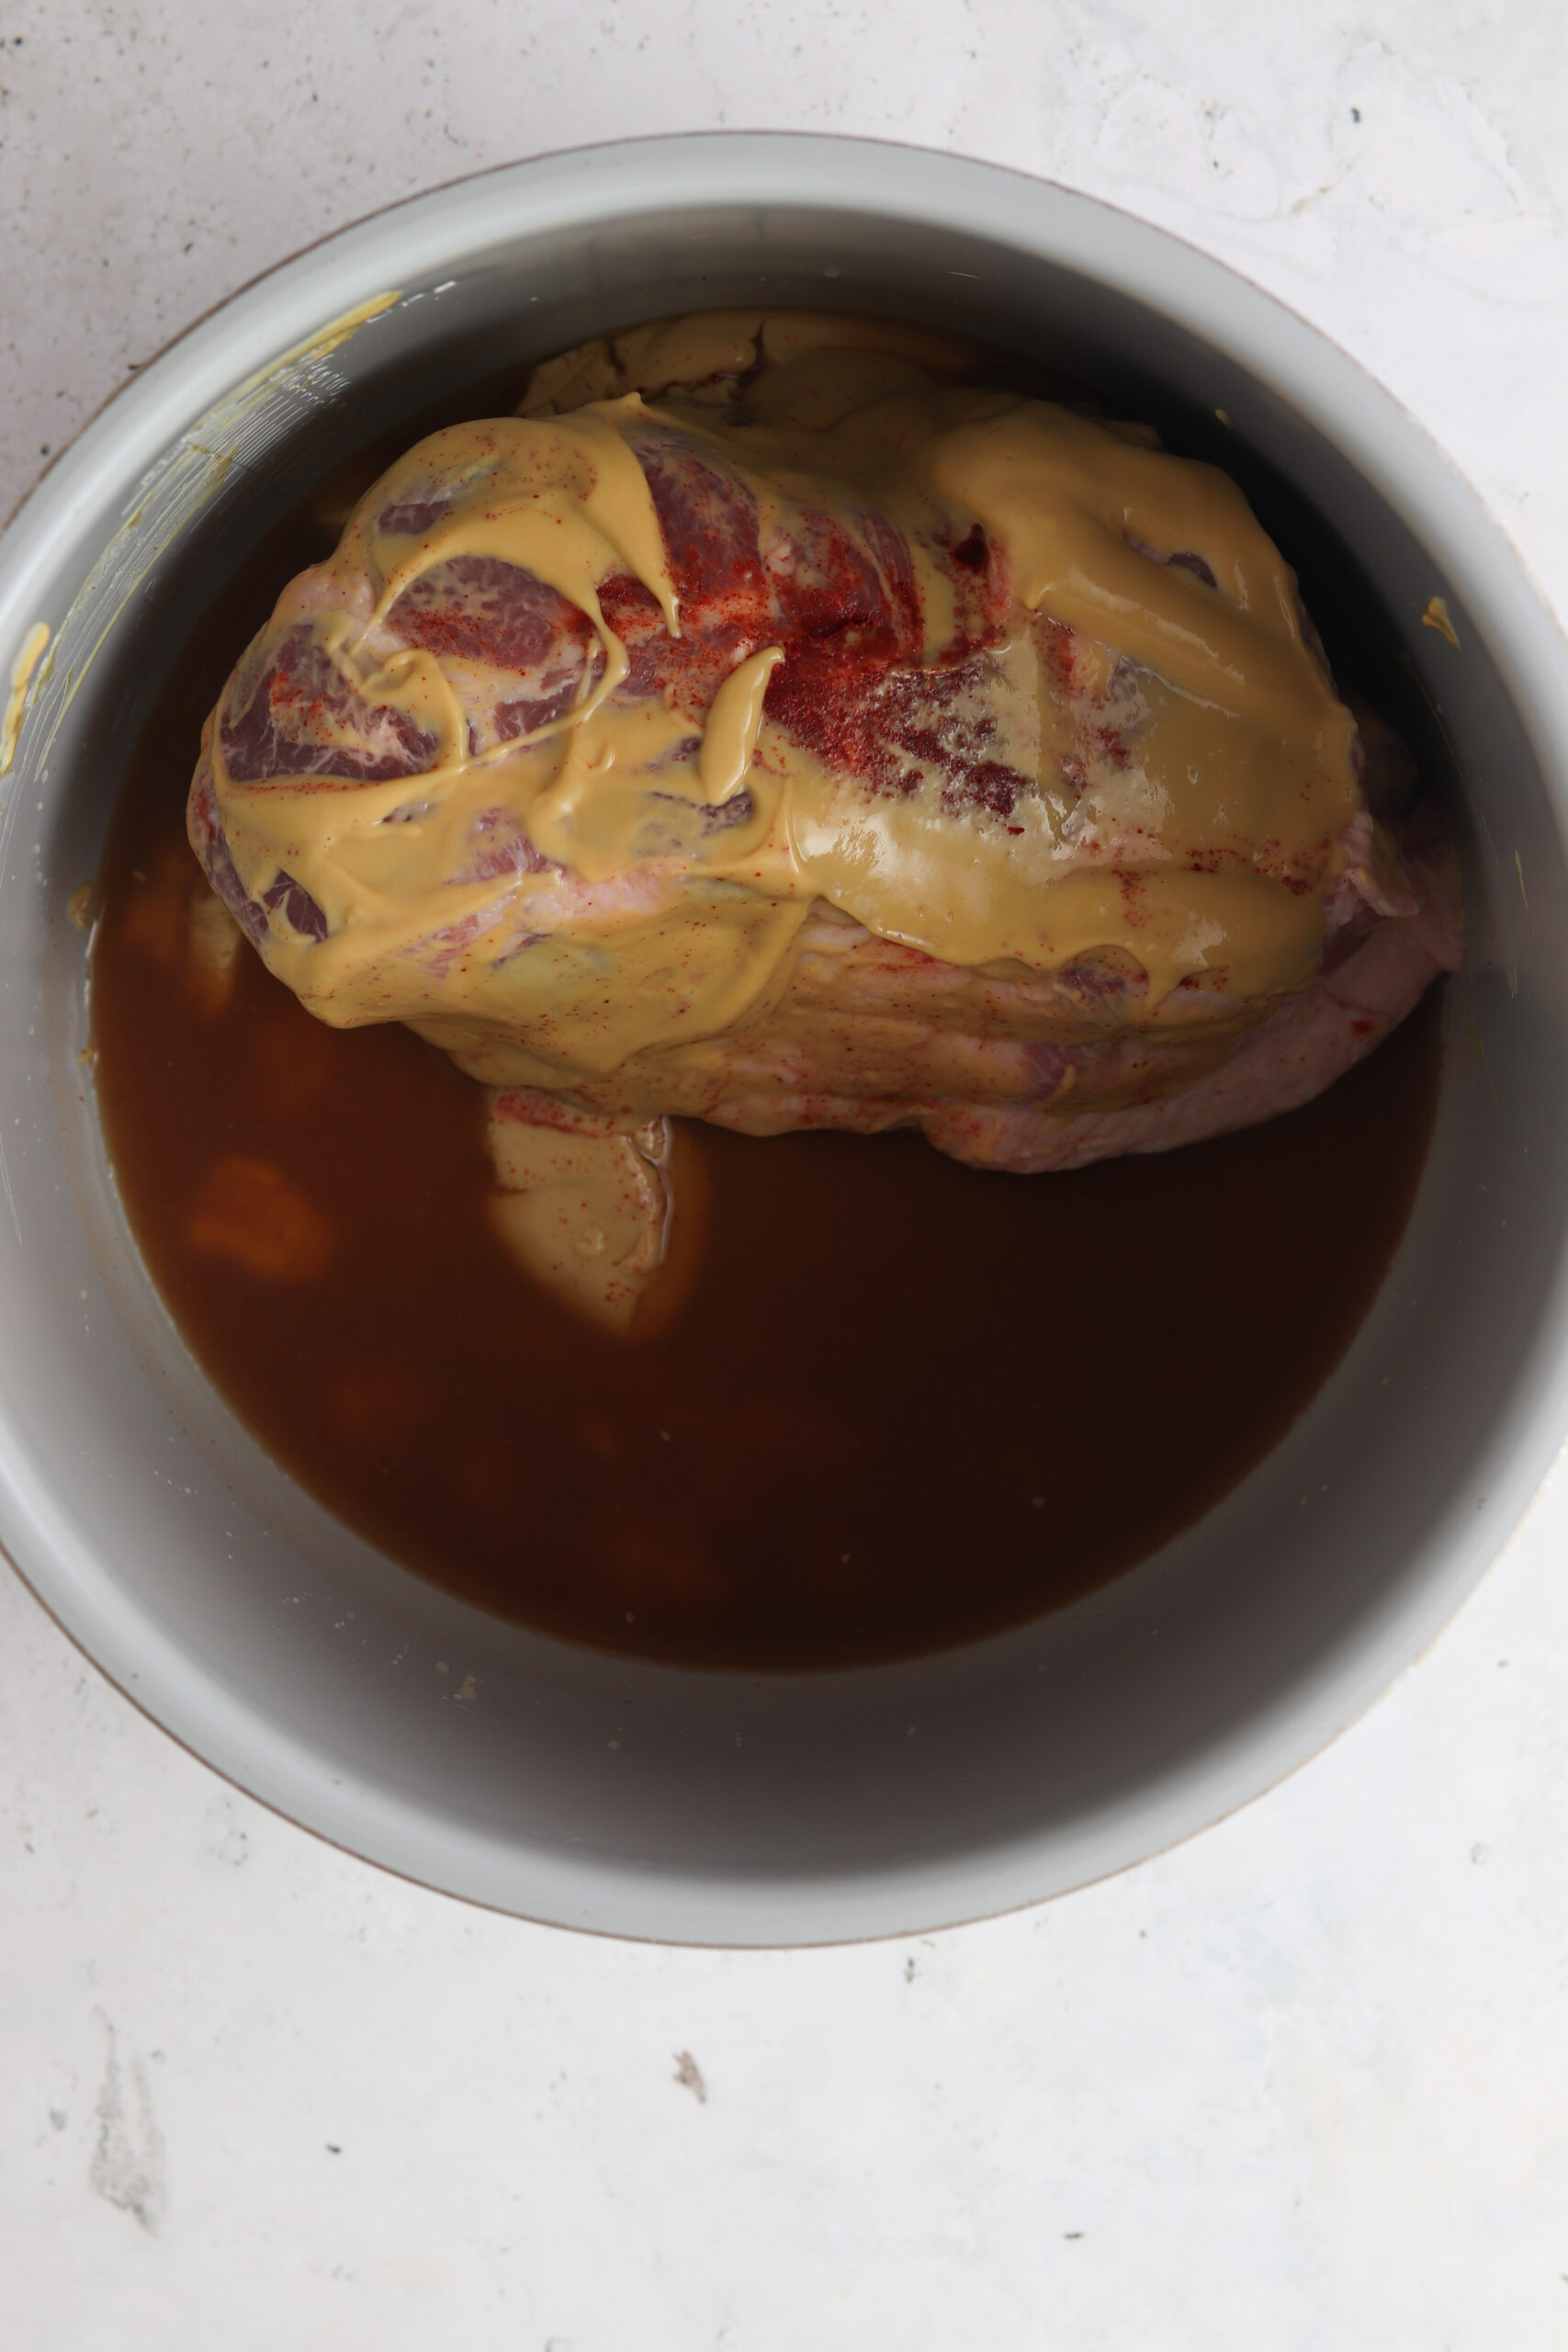 Raw pork butt with honey mustard coating in an instant pot.